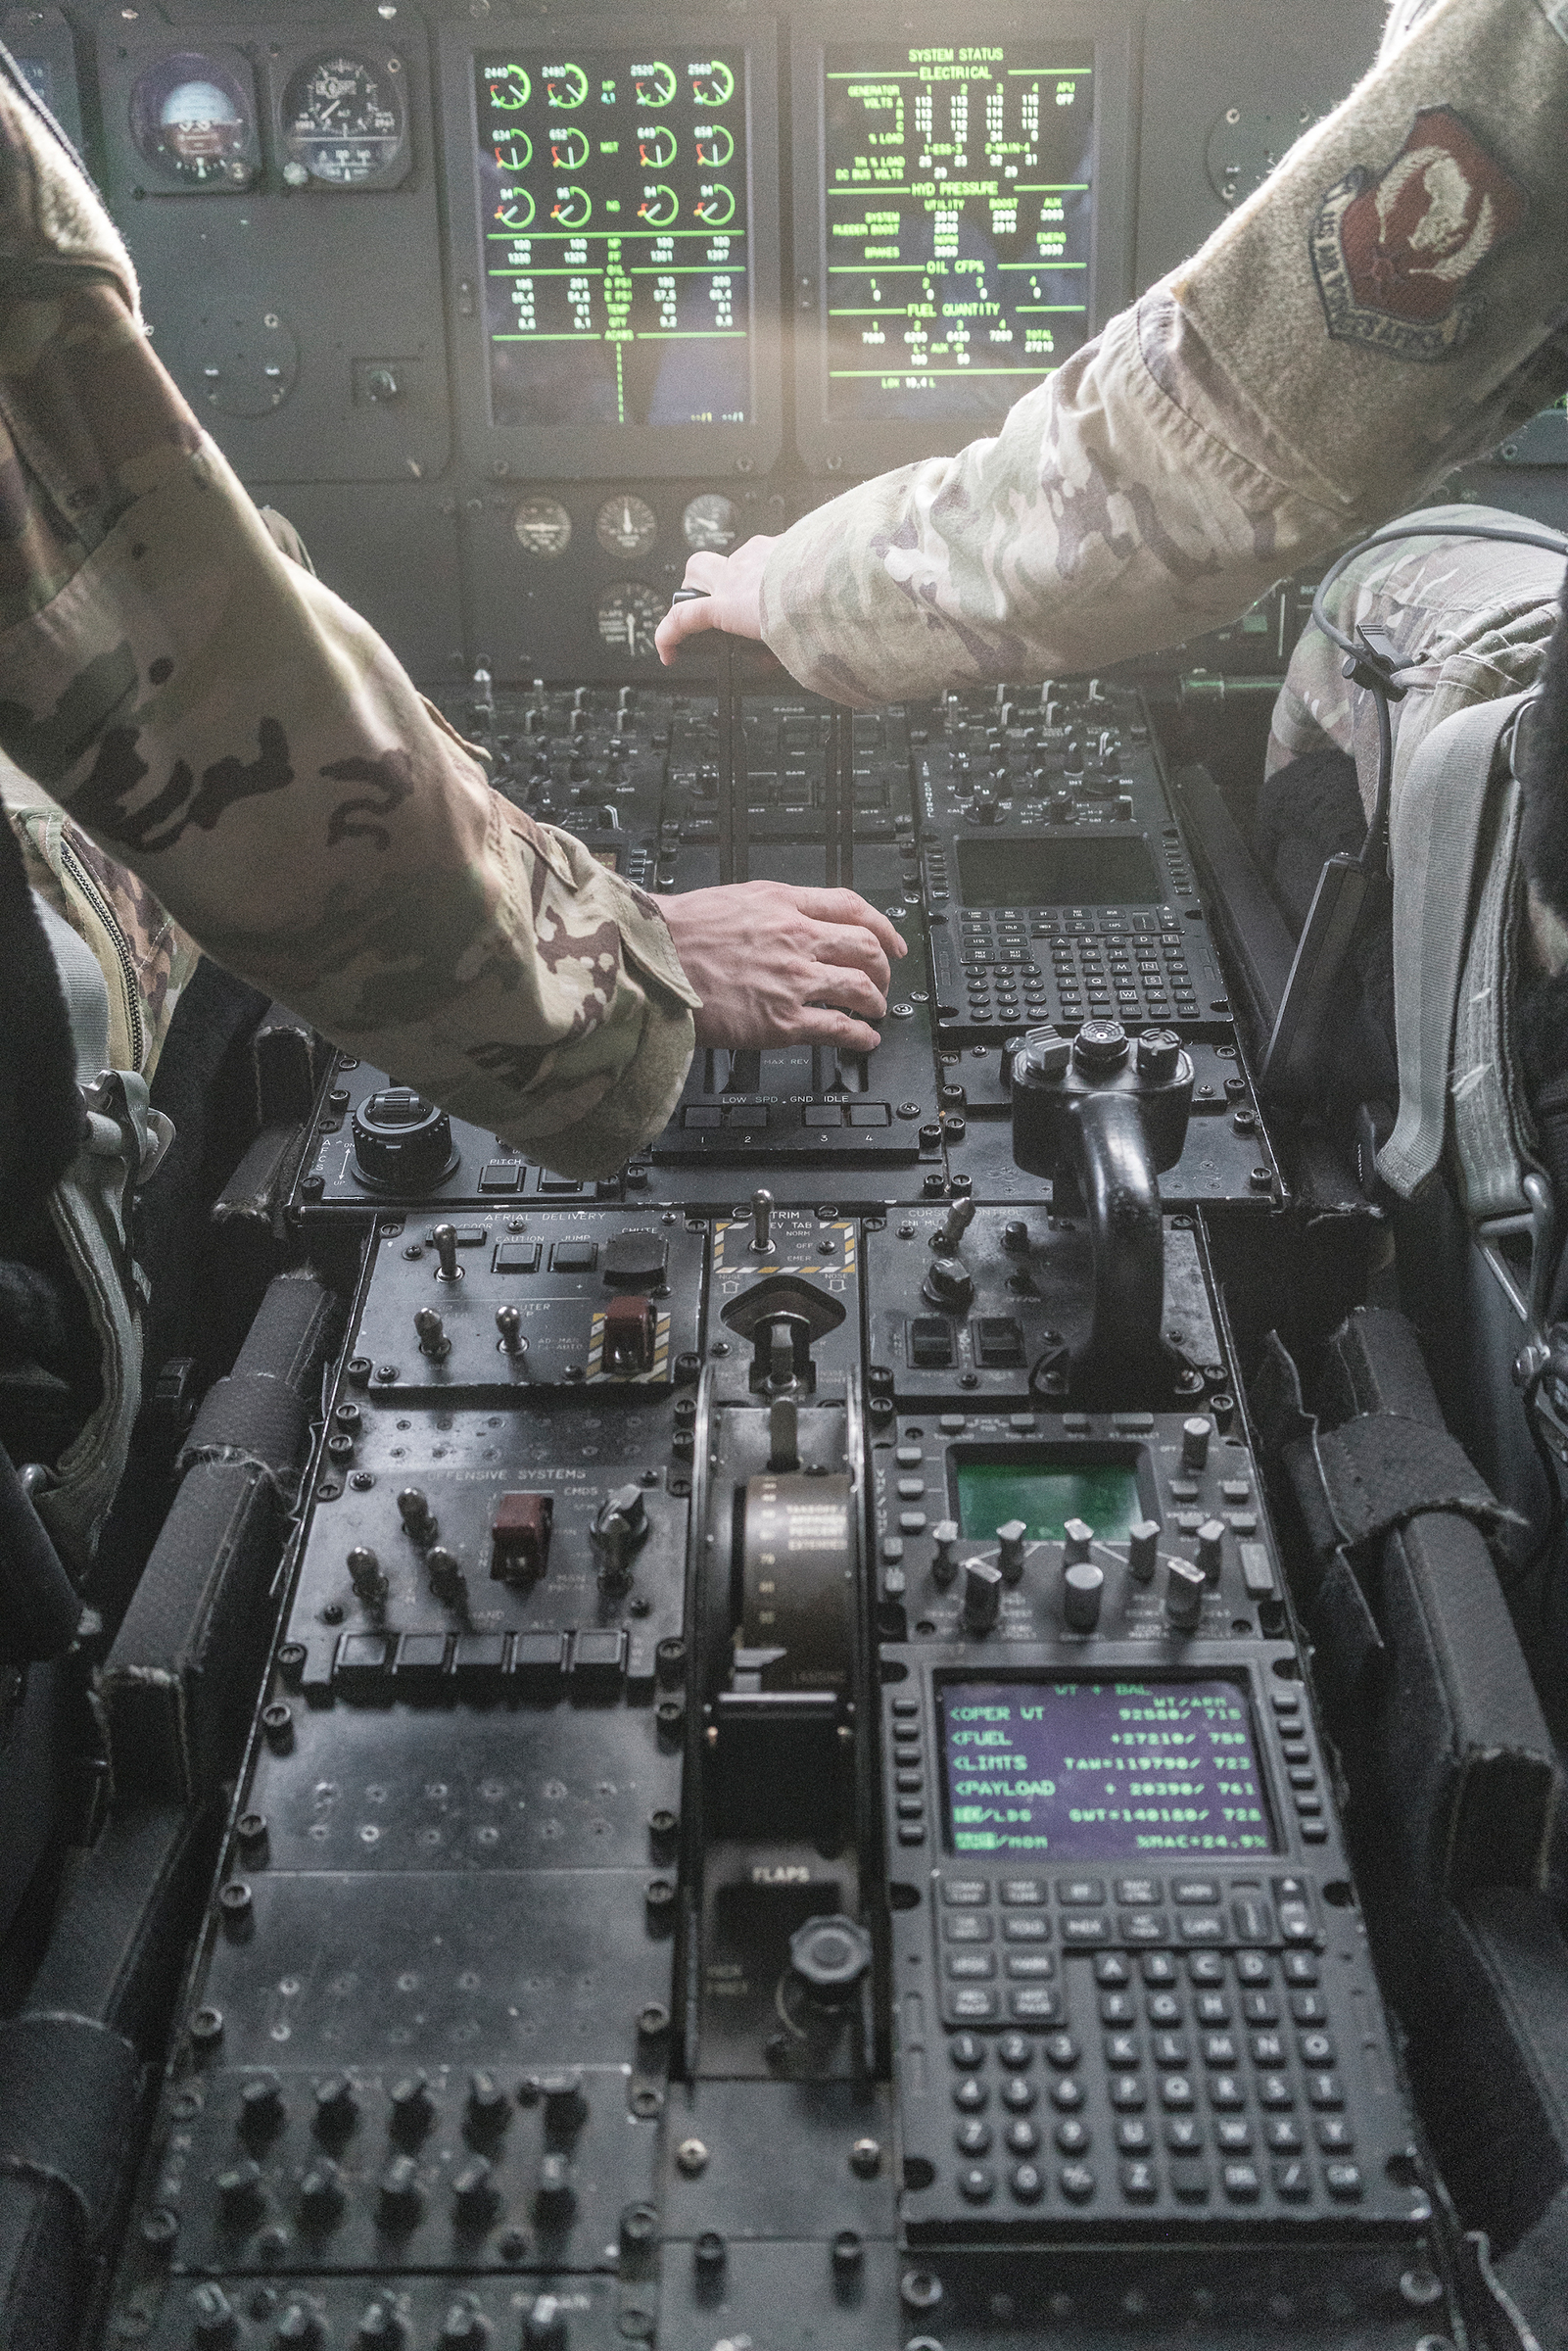 U.S. pilots control a C-130 plane during an emergency exercise above Djibouti. (Emanuele Satolli for TIME)